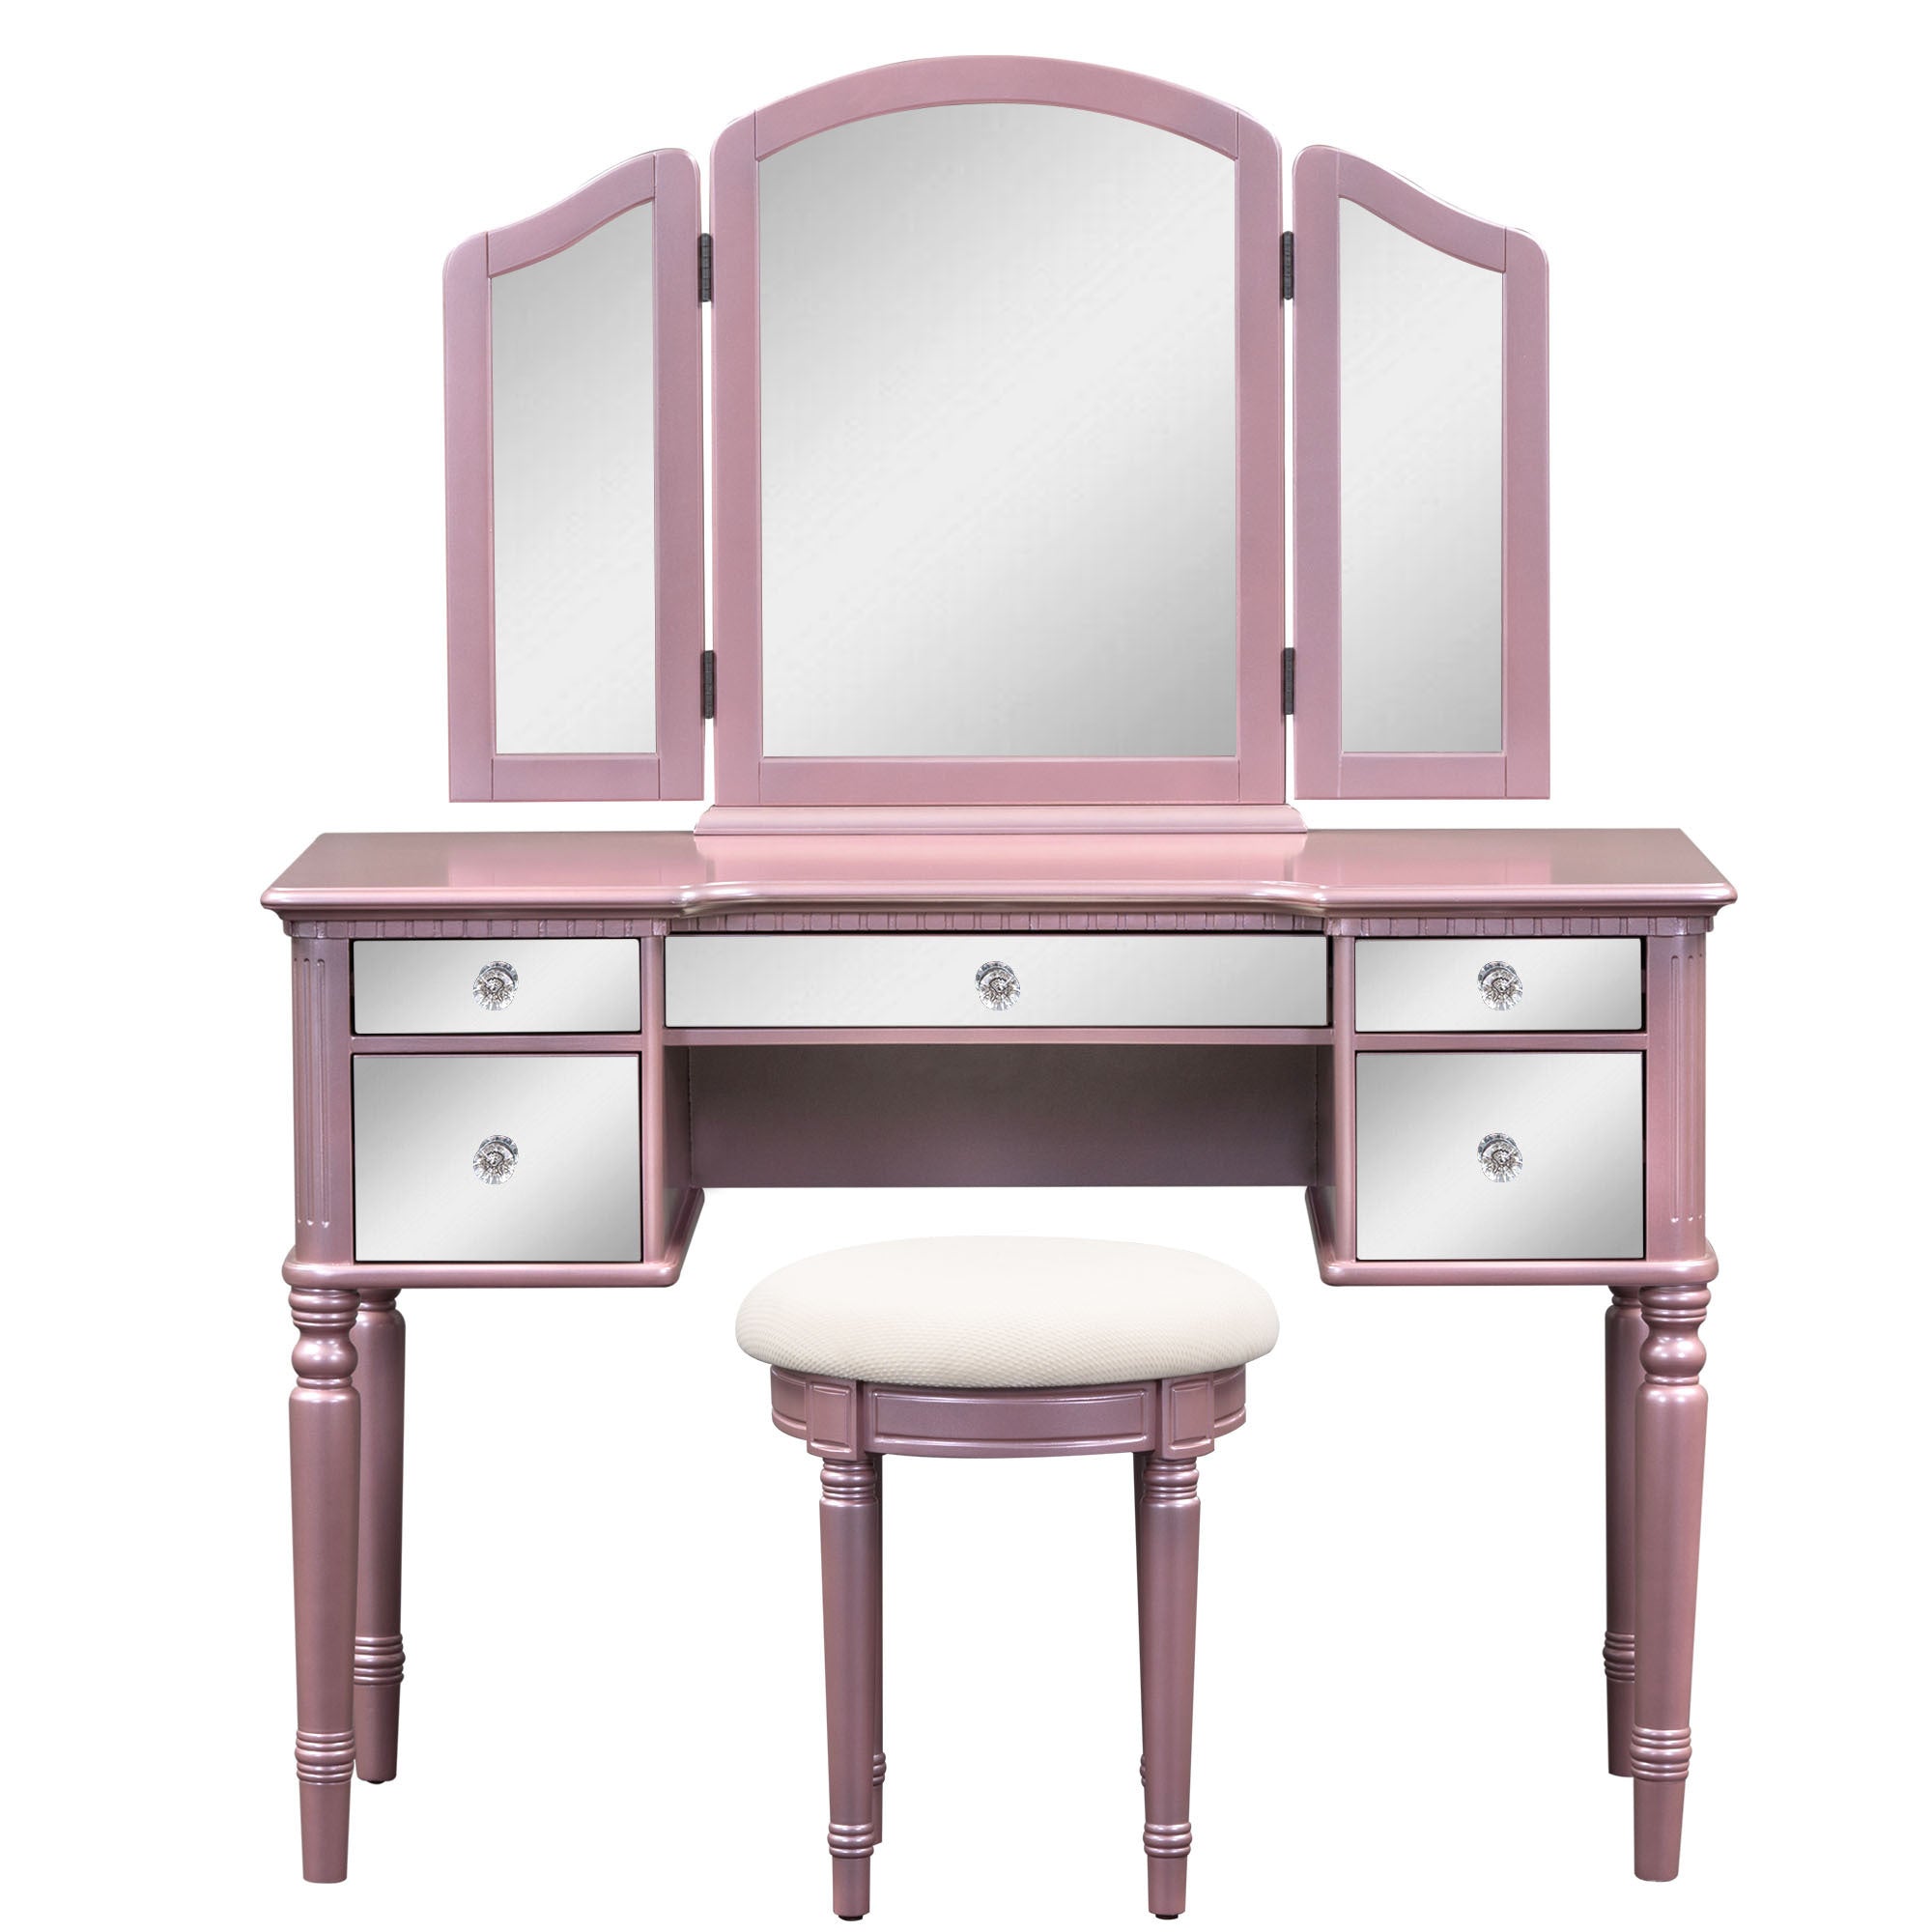 43" Rose Makeup Vanity Dressing Table Set with Mirrored Drawers and Stool